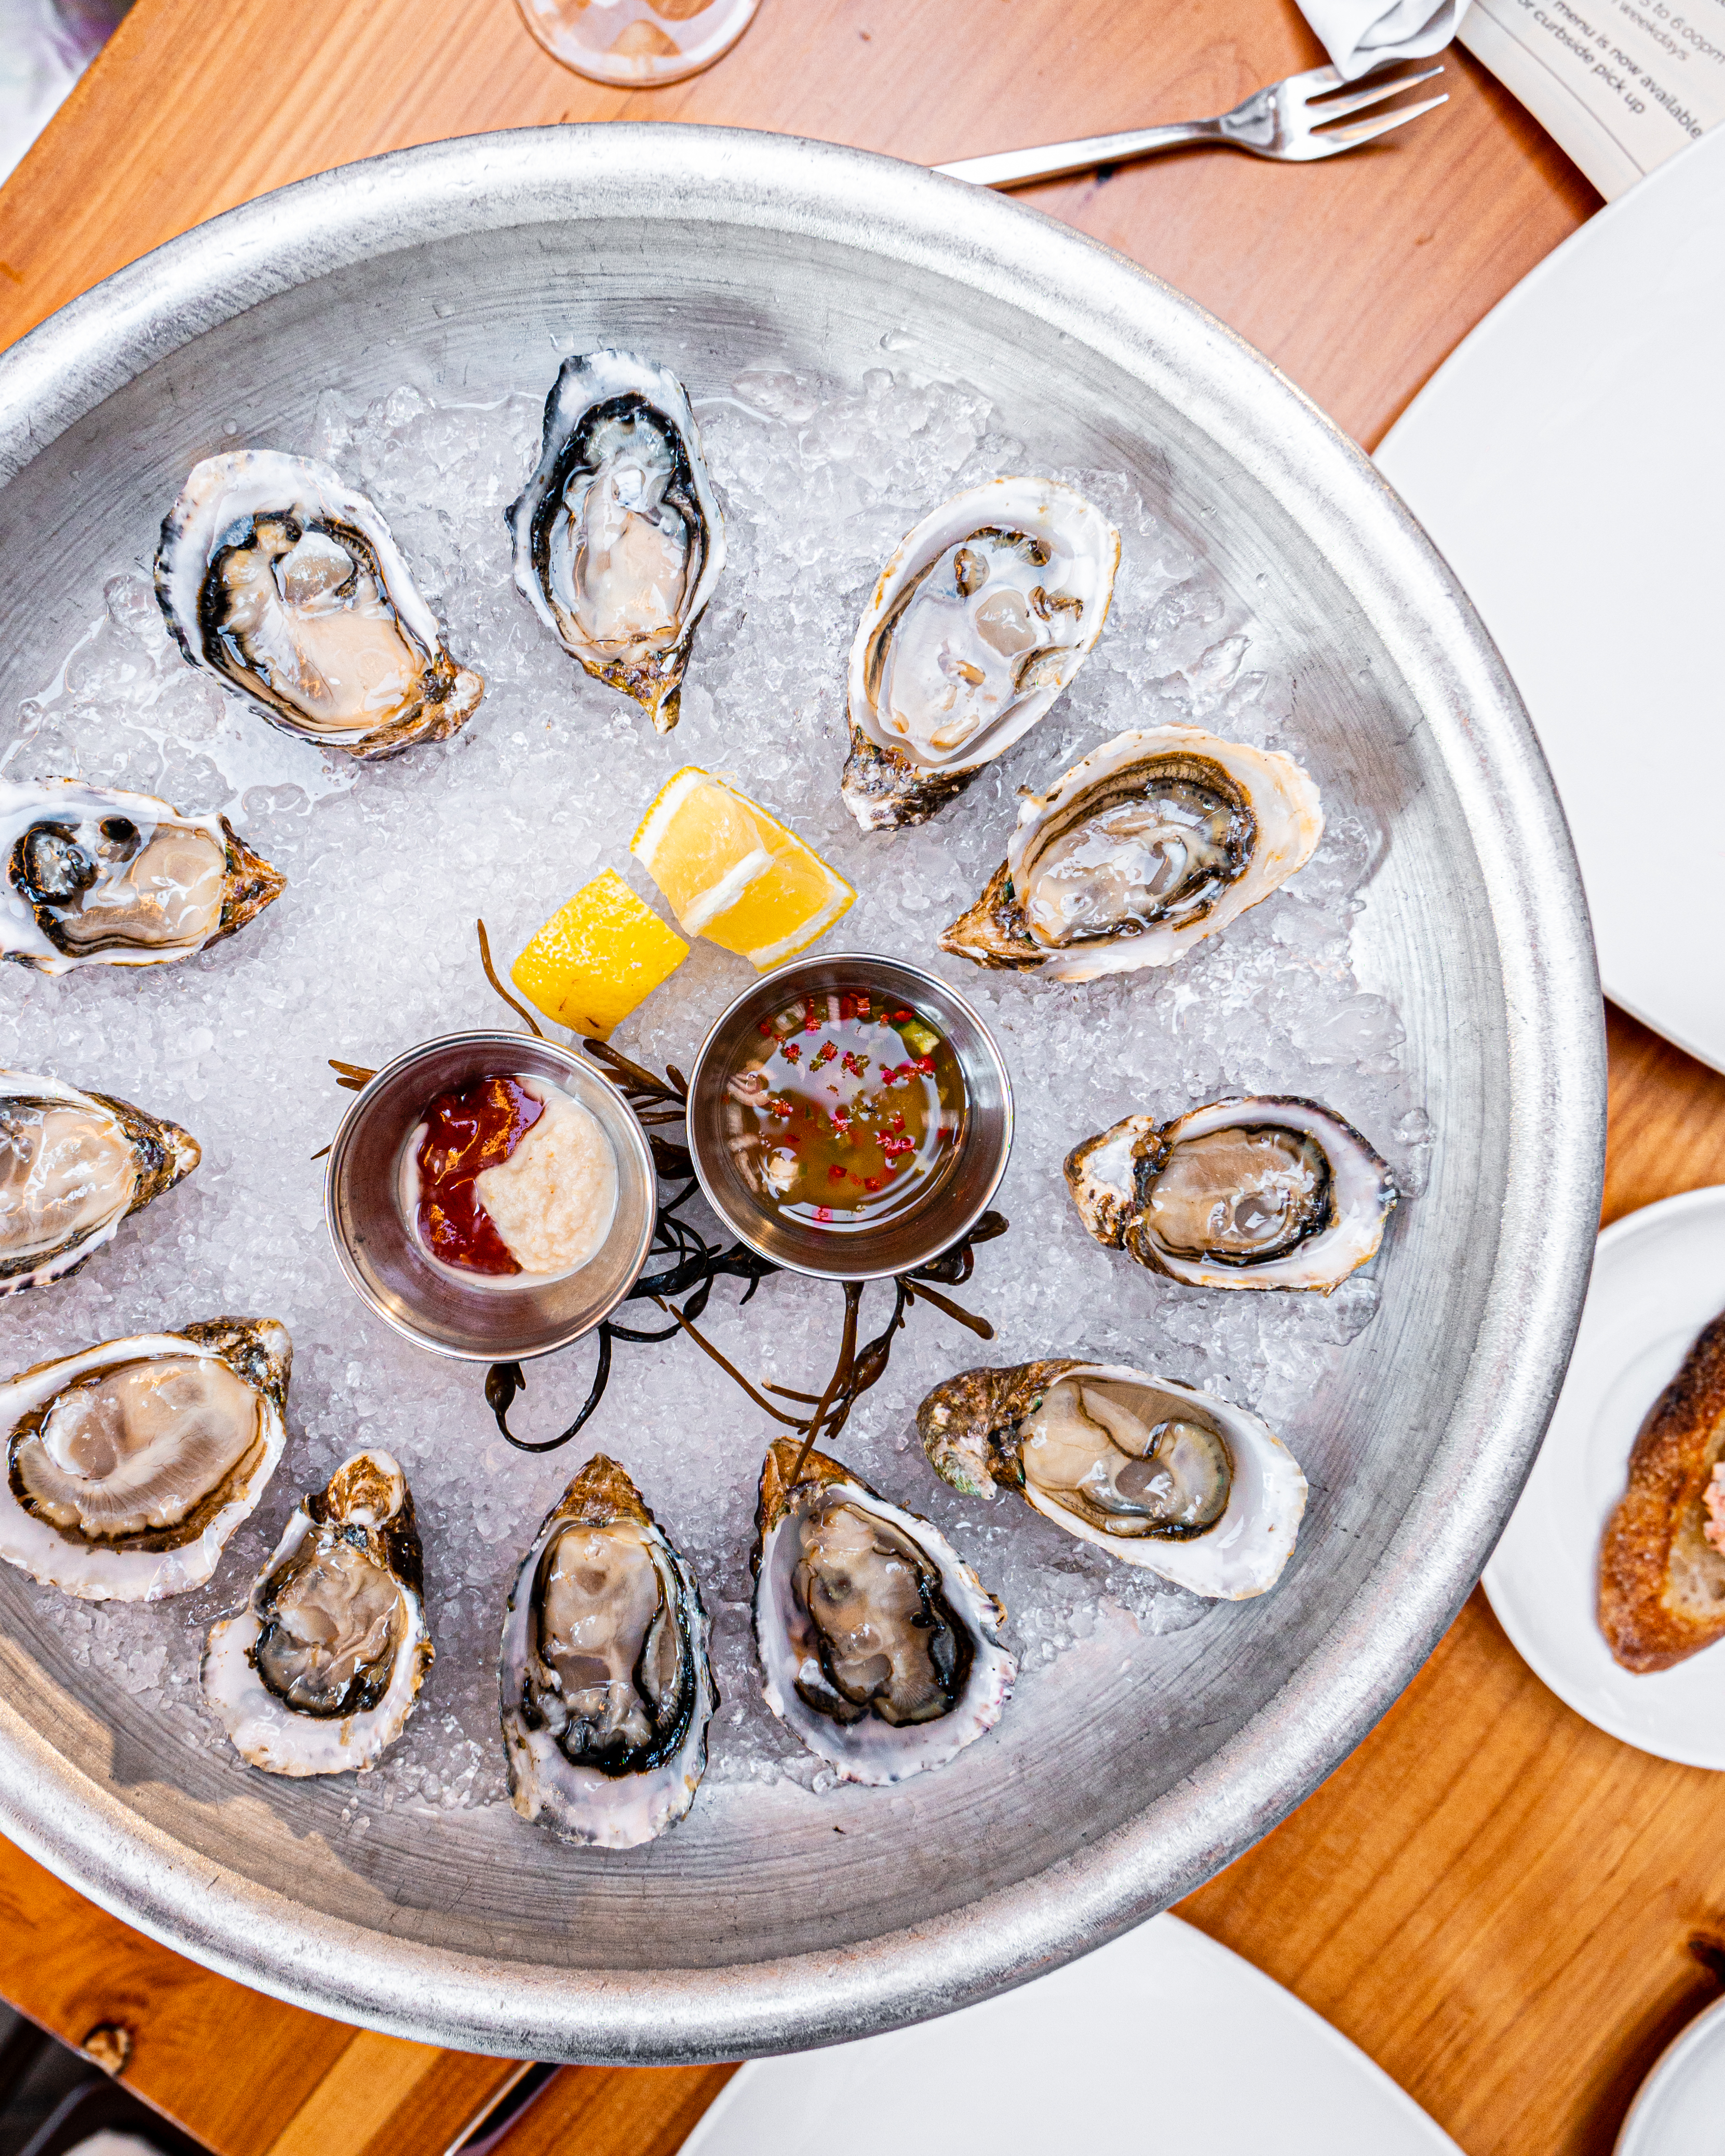 Oysters on a plate with dipping sauces